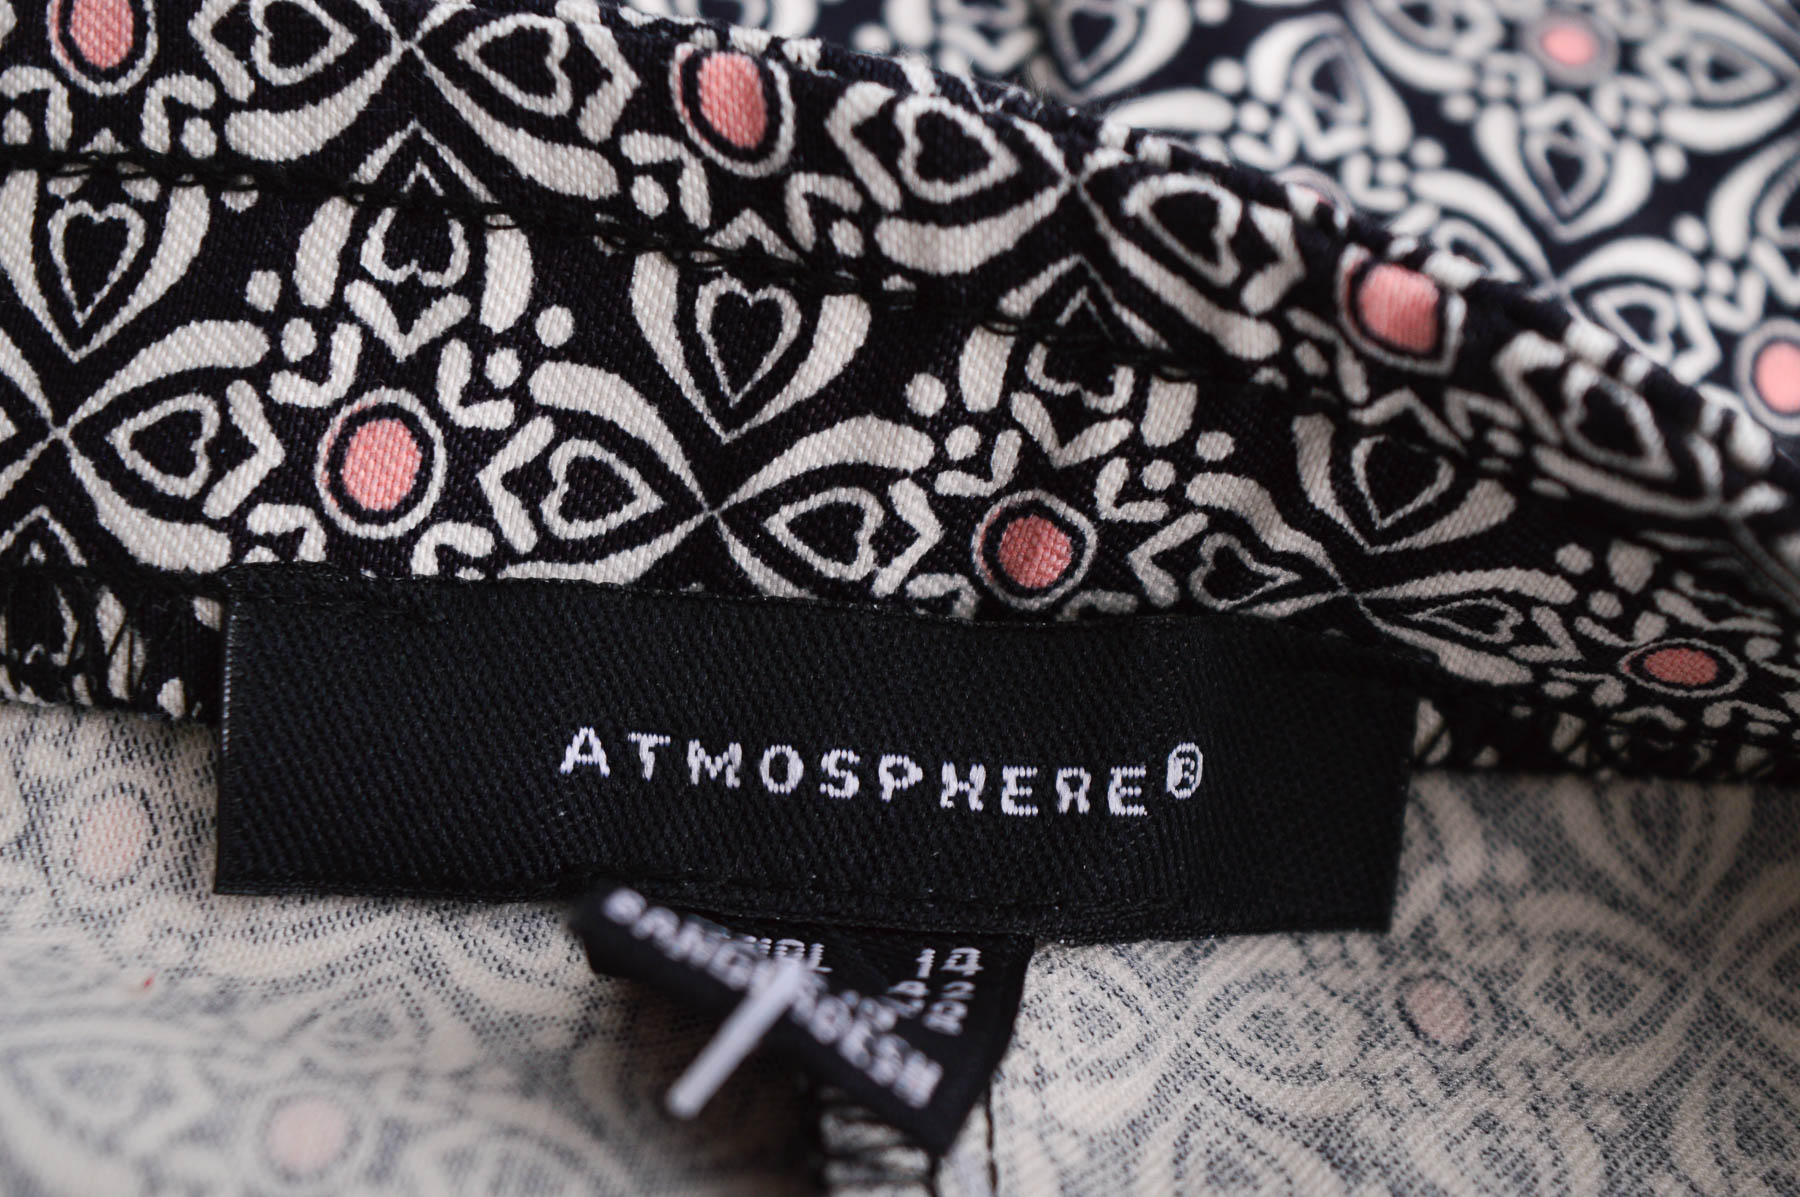 Women's trousers - Atmosphere - 2